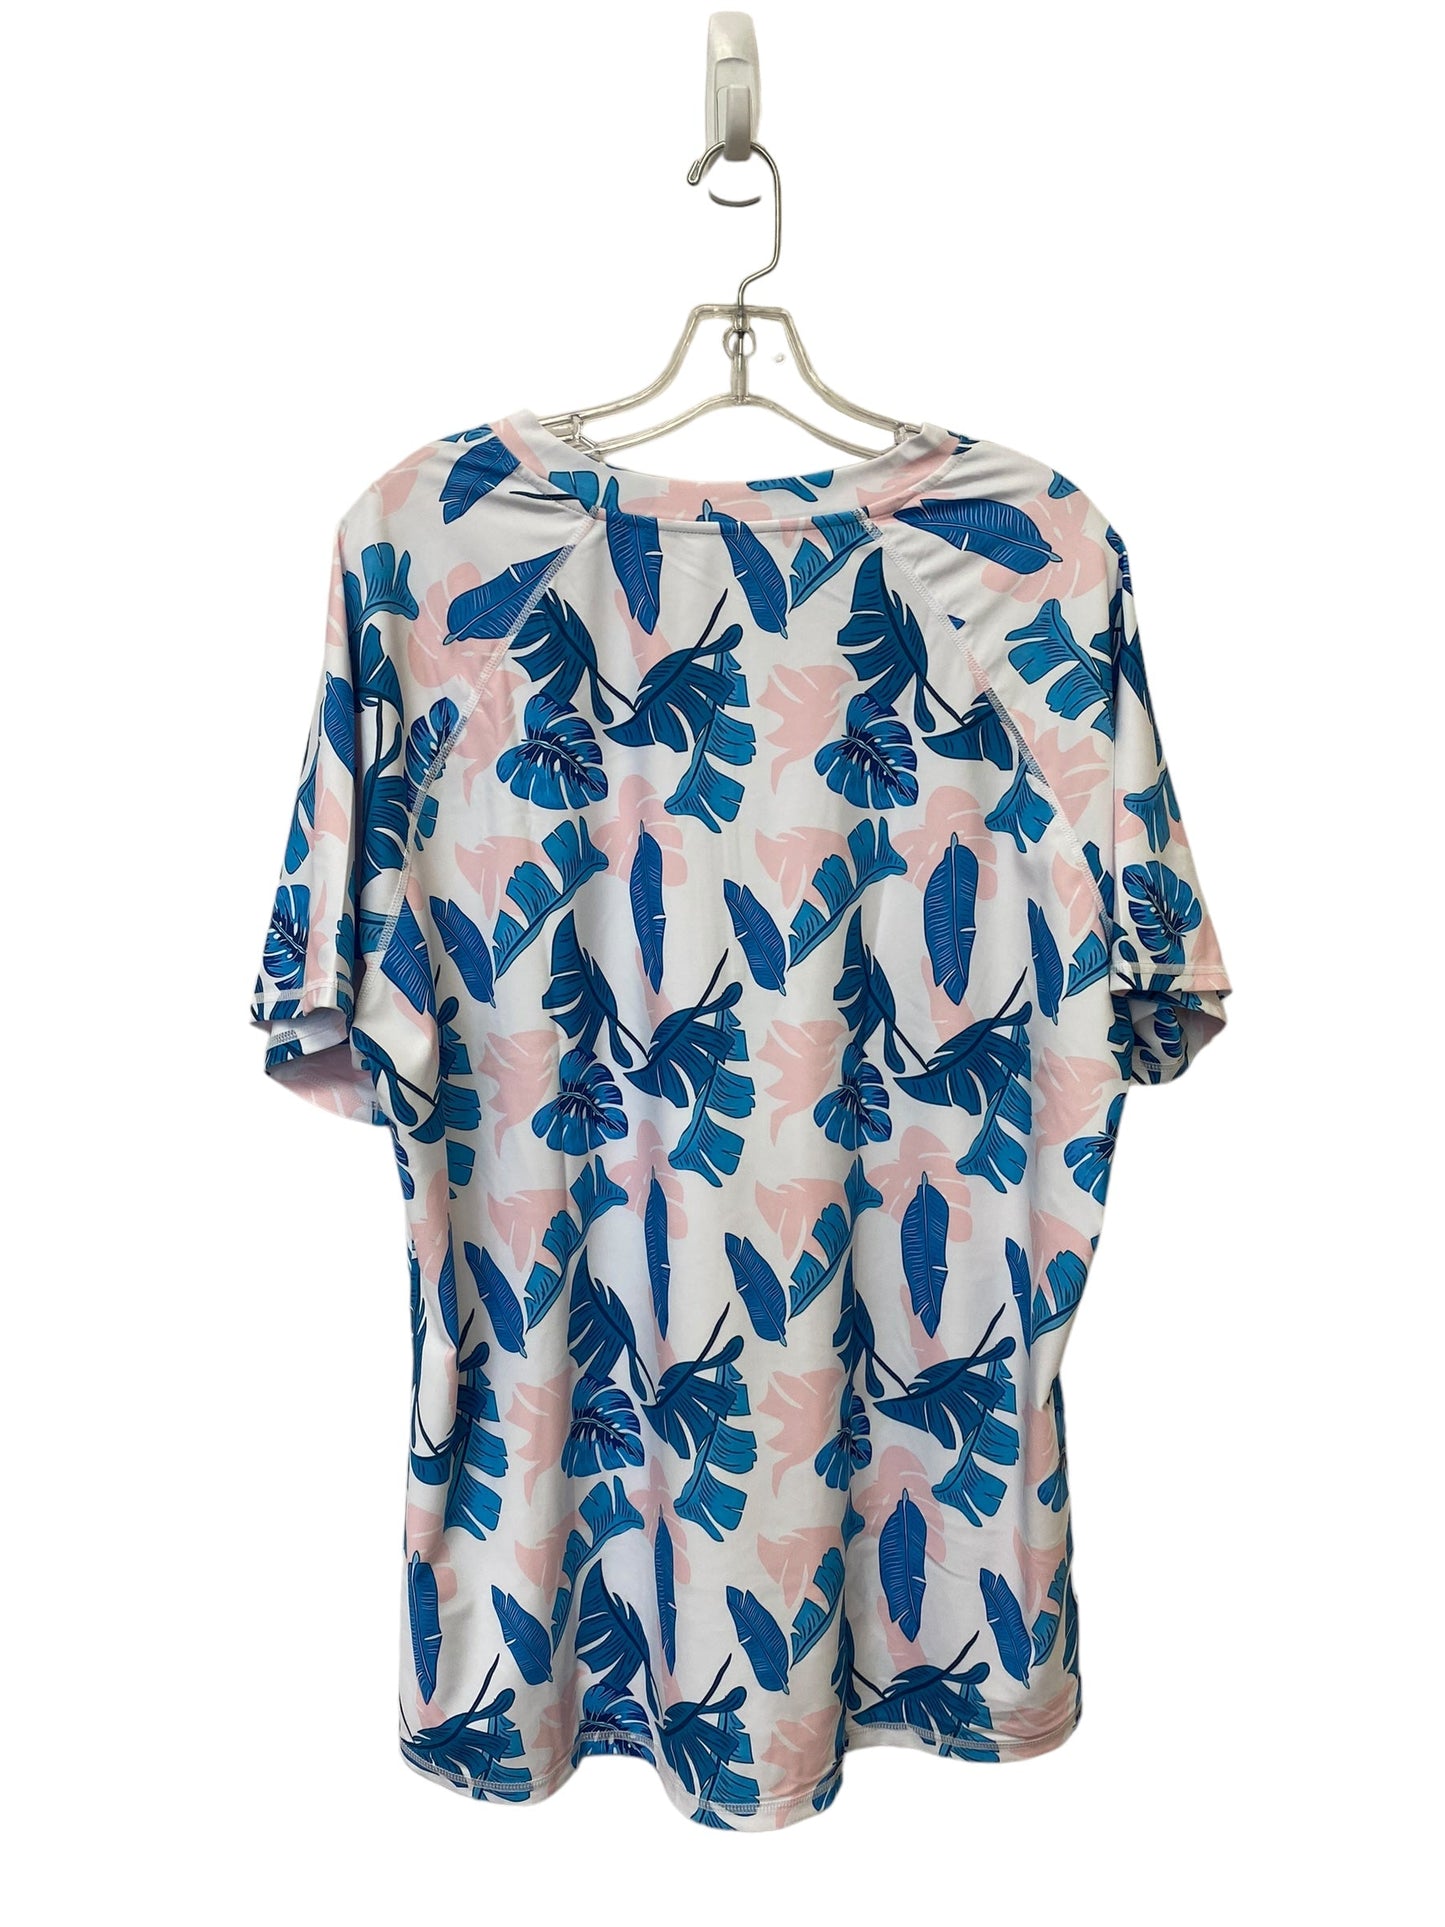 Tropical Print Top Short Sleeve Clothes Mentor, Size 3x